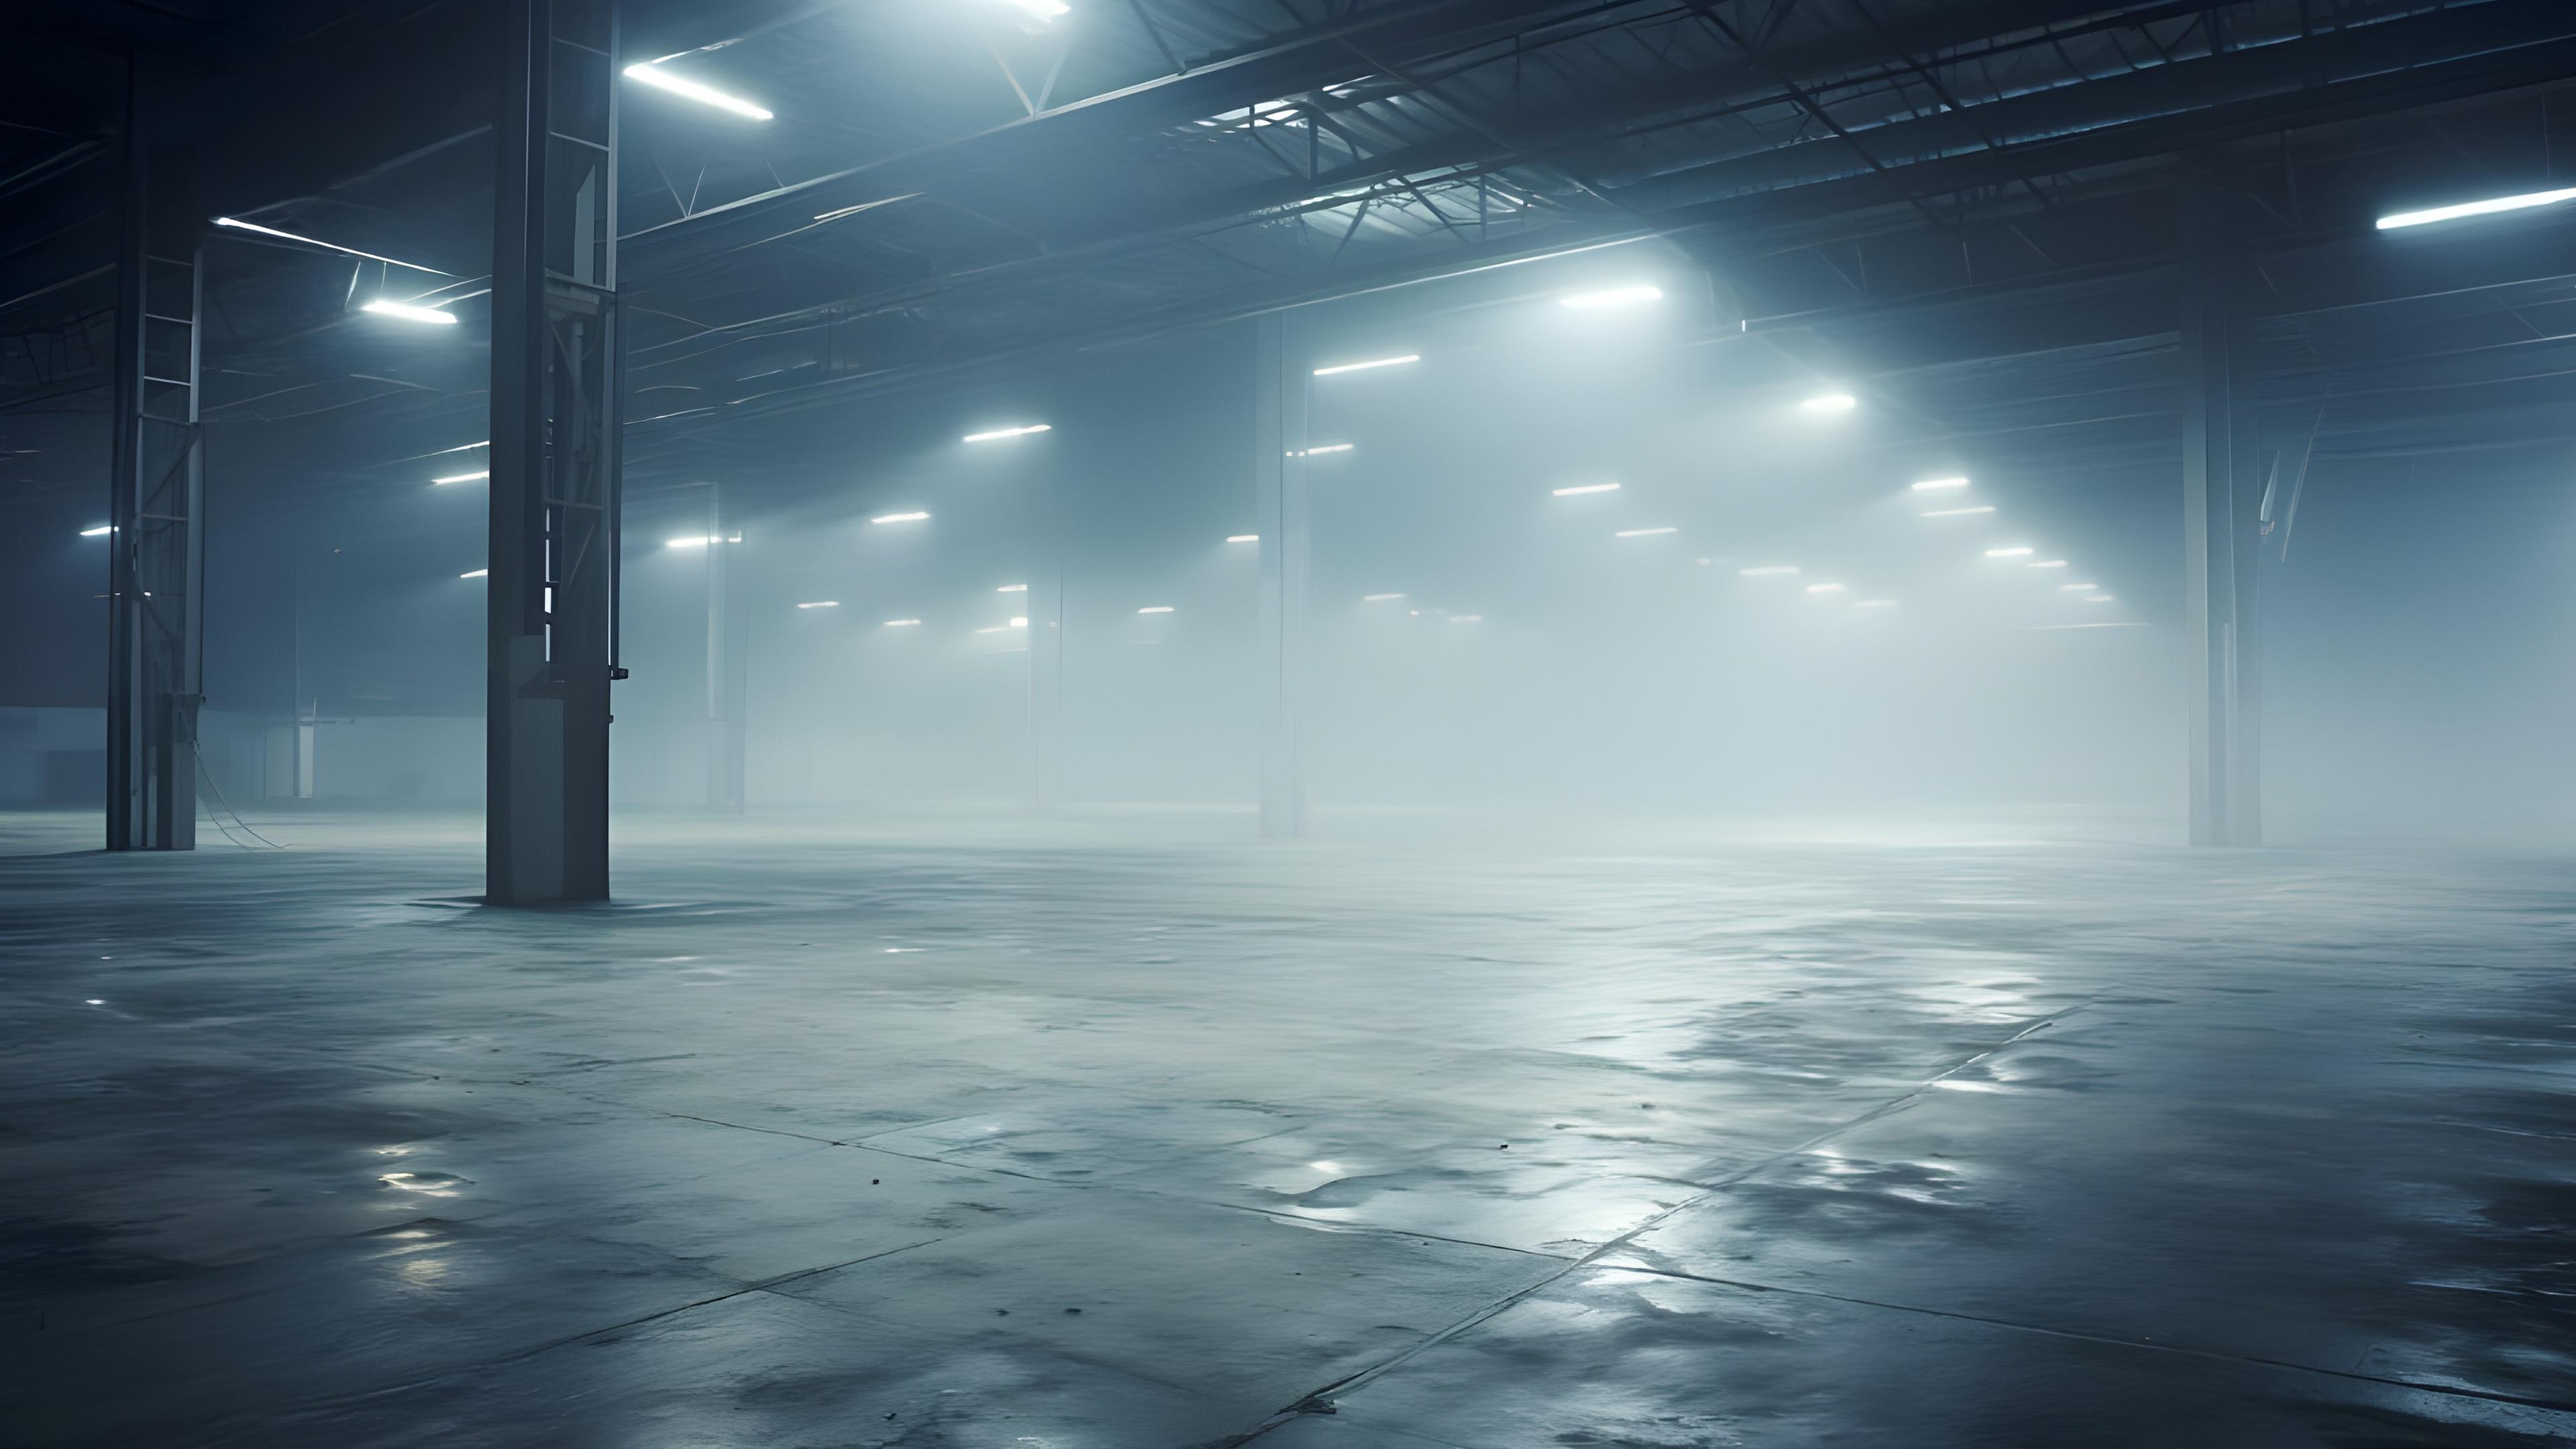 Backrooms Level 1 is a massive warehouse with concrete floors and